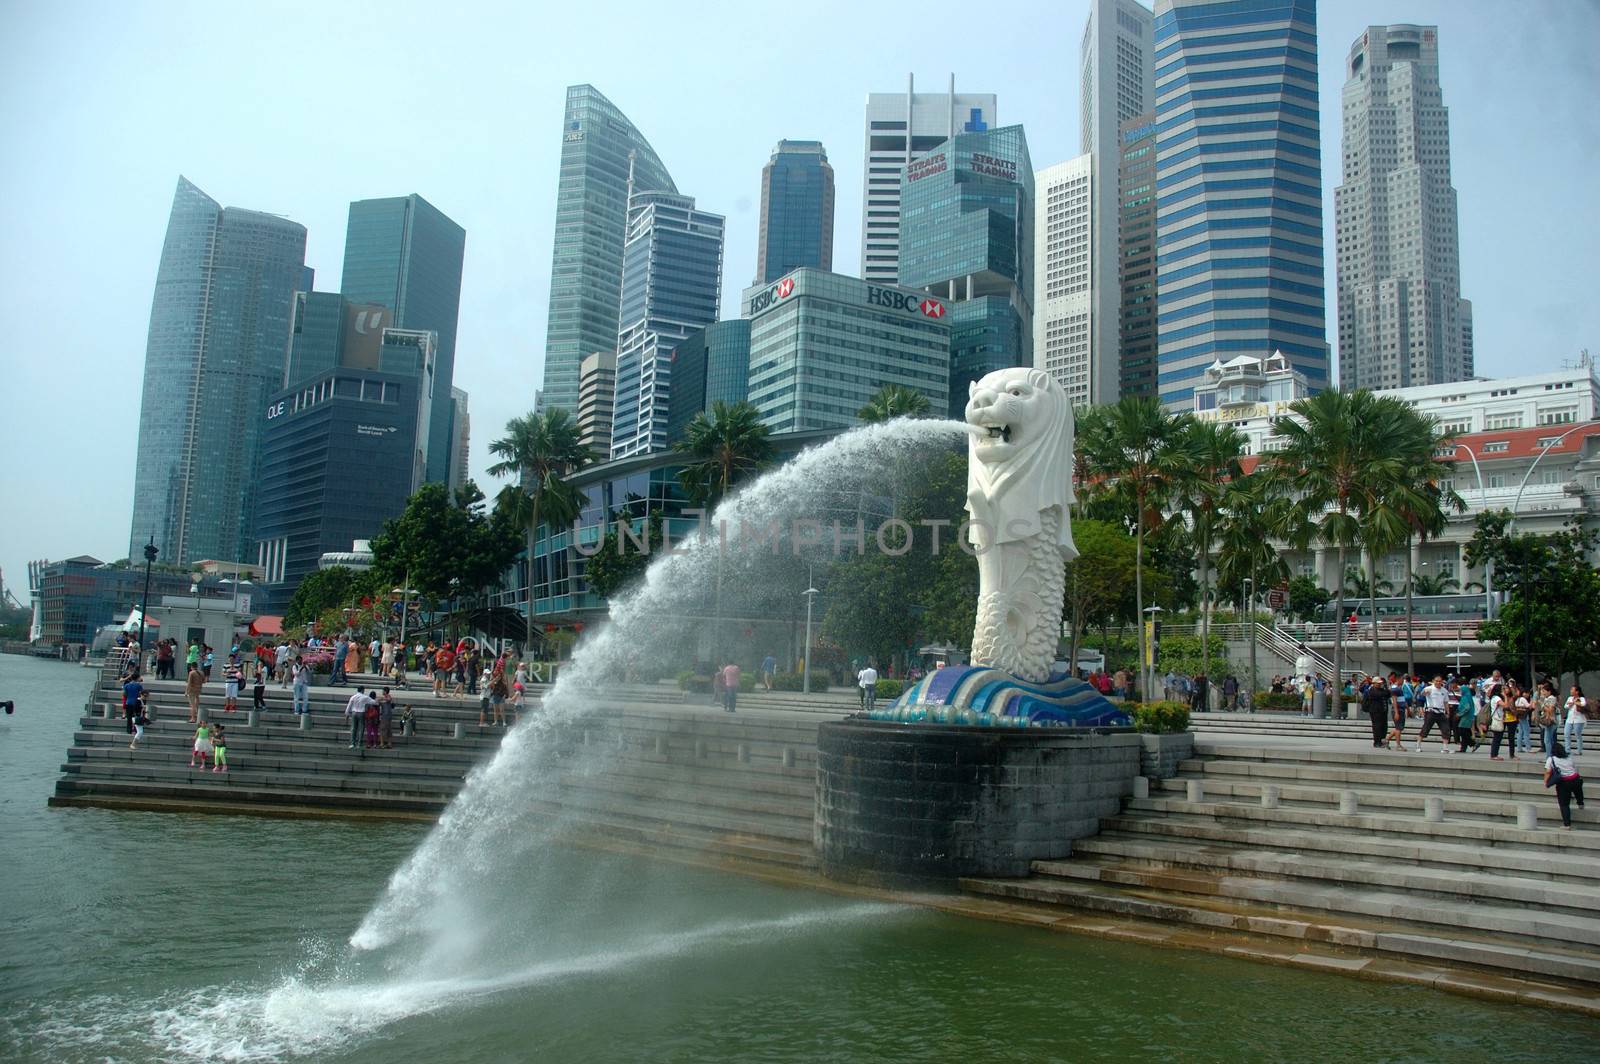 Singapore, Singapore - January 18, 2014: Merlion statue that become iconic of Singapore country.